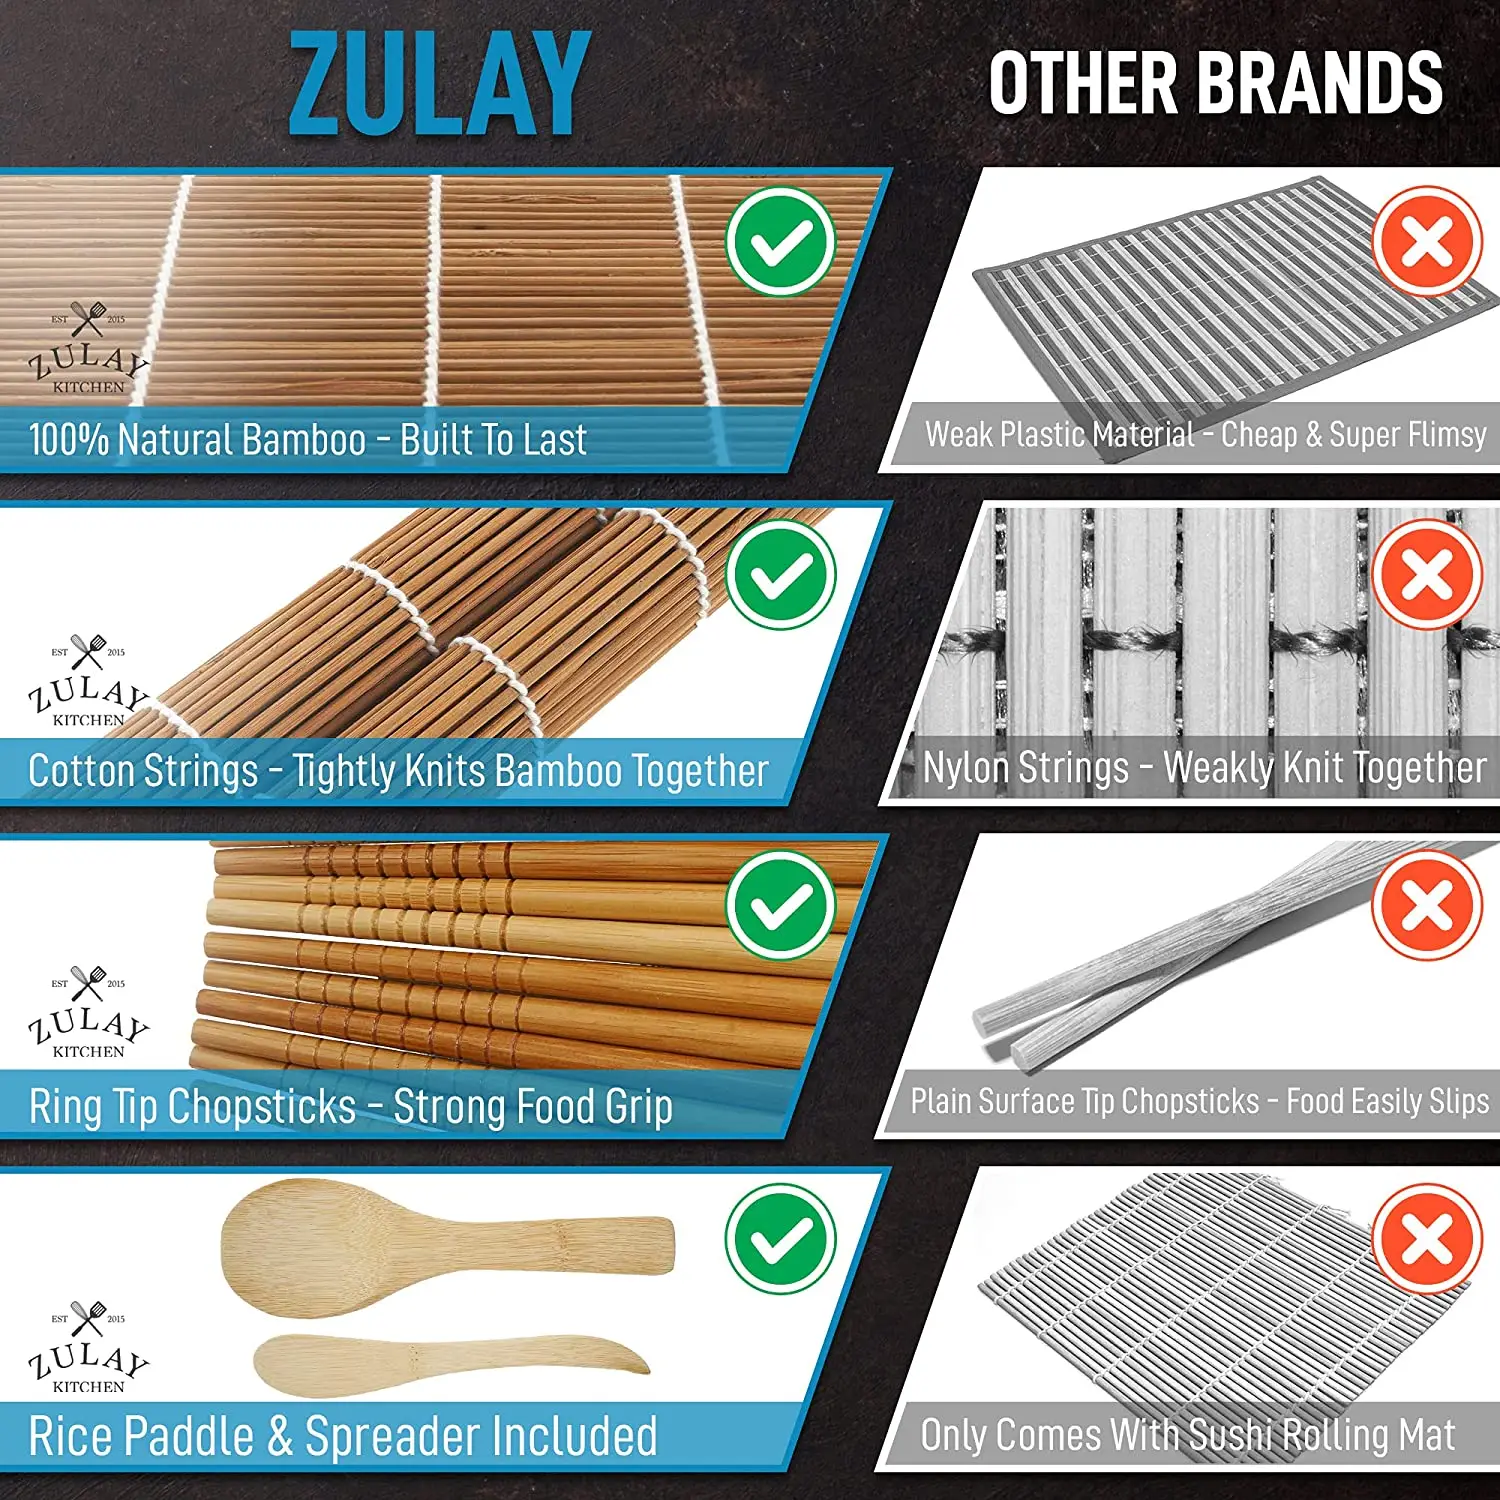 Zulay Kitchen Sushi Making Kit For Beginners - Includes 2 Bamboo Sushi Mat